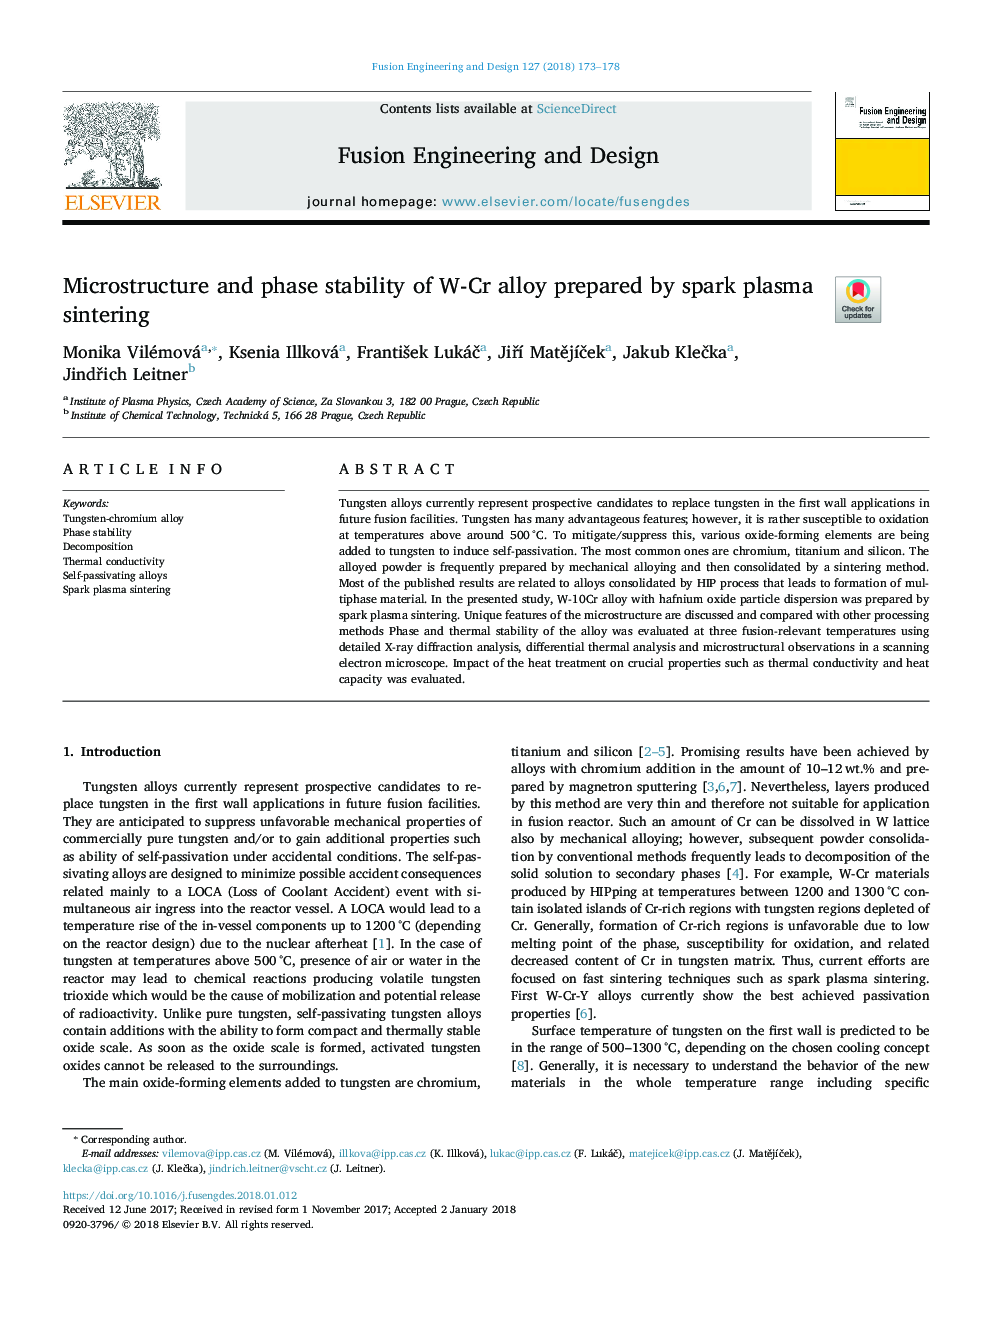 Microstructure and phase stability of W-Cr alloy prepared by spark plasma sintering